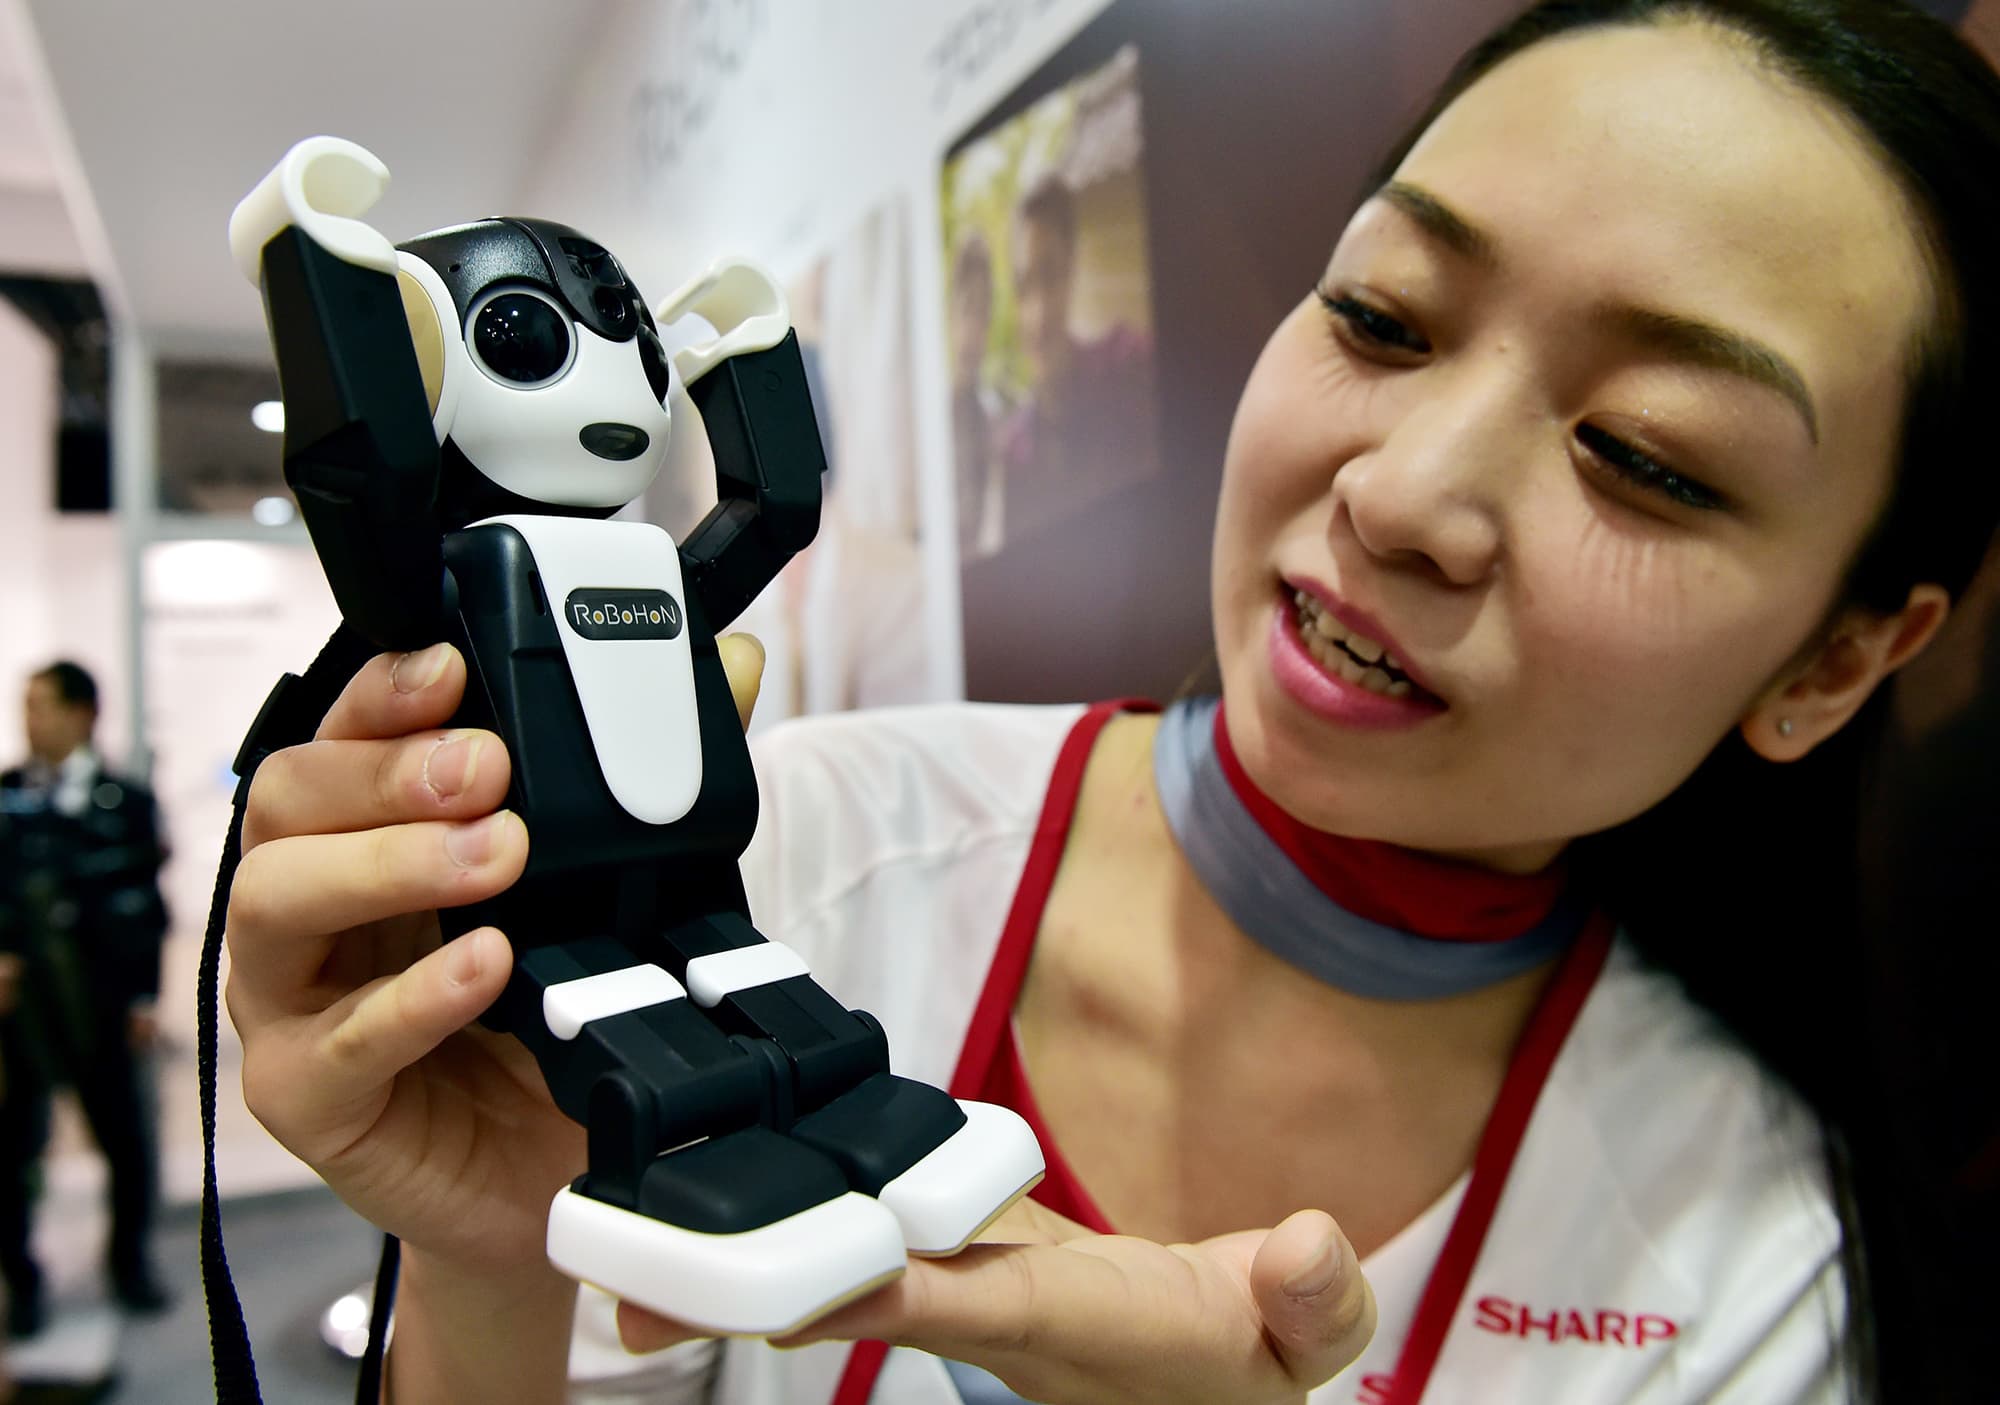 robohon-is-the-robot-smartphone-youve-always-wanted